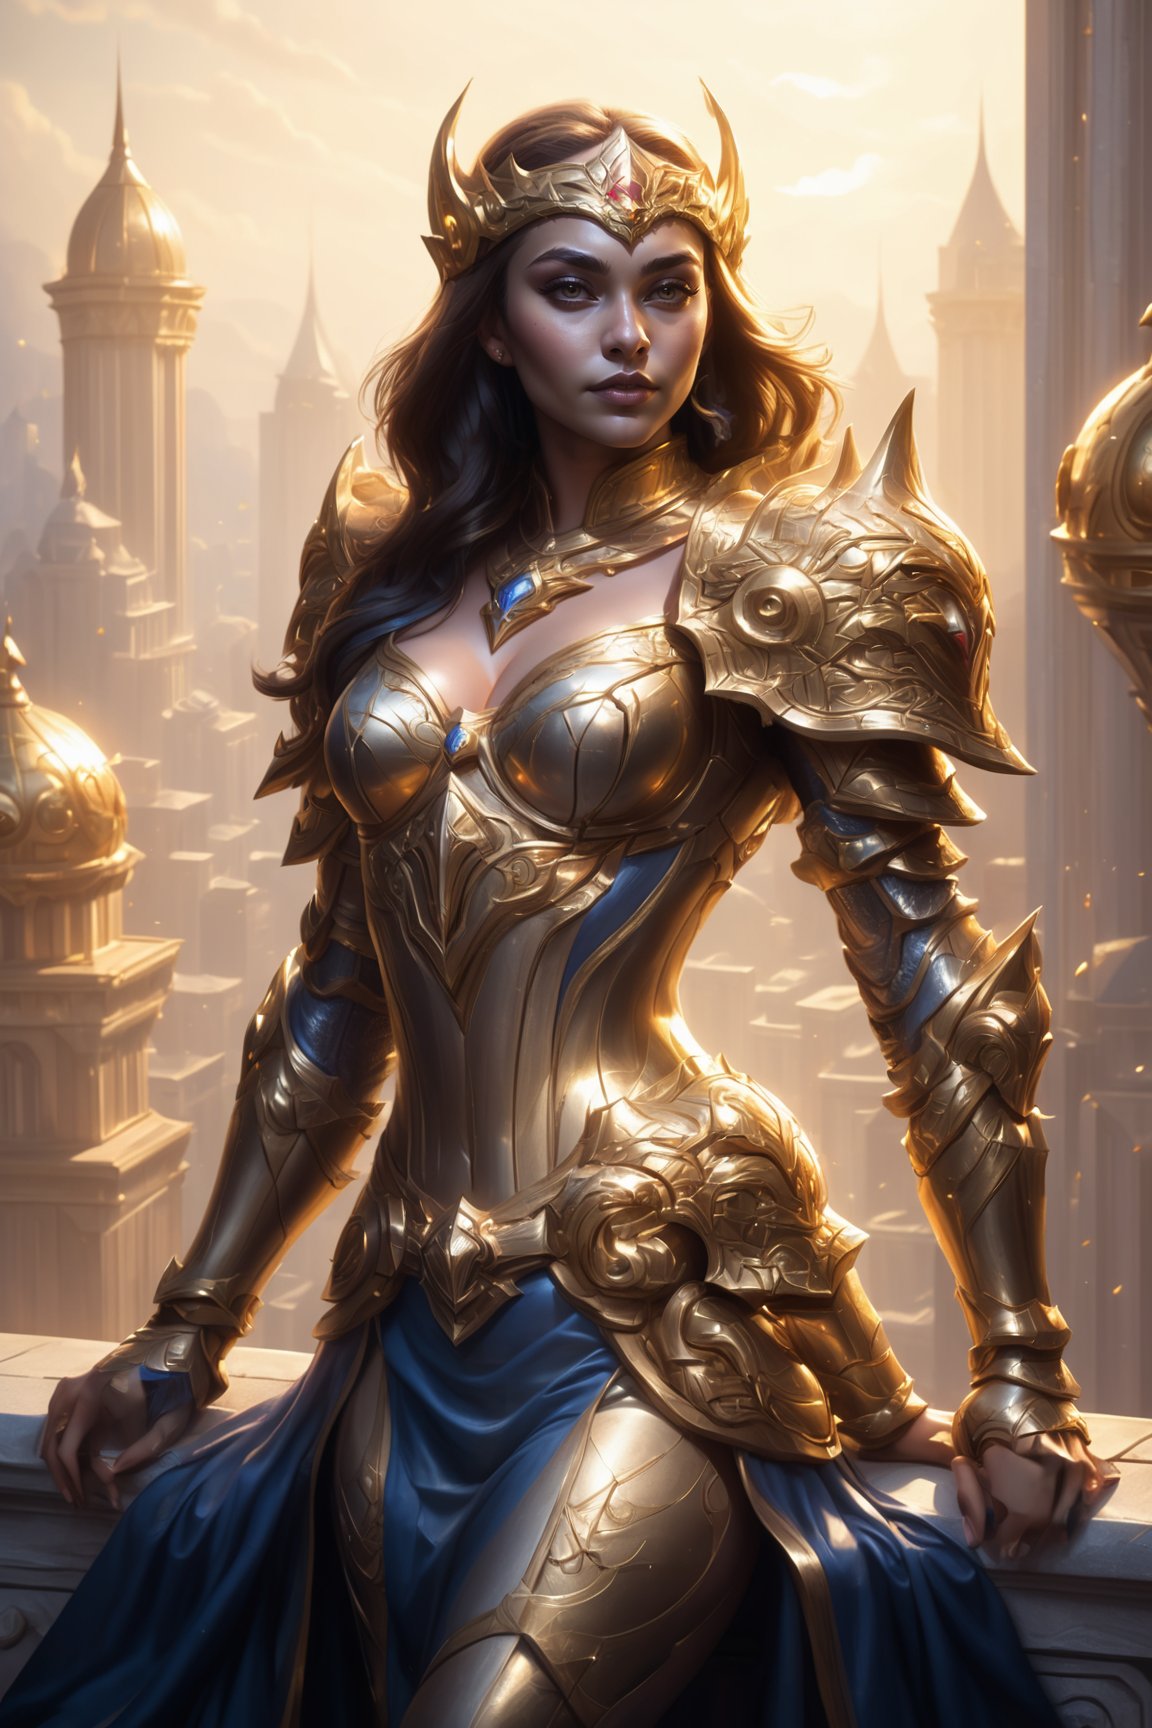 league of legends artwork,
1 girl, (female genaral), epic posing on the top of the buildding balcony stage, straight view, golden armor, luxury. royal armor, intricate armor,more detail XL